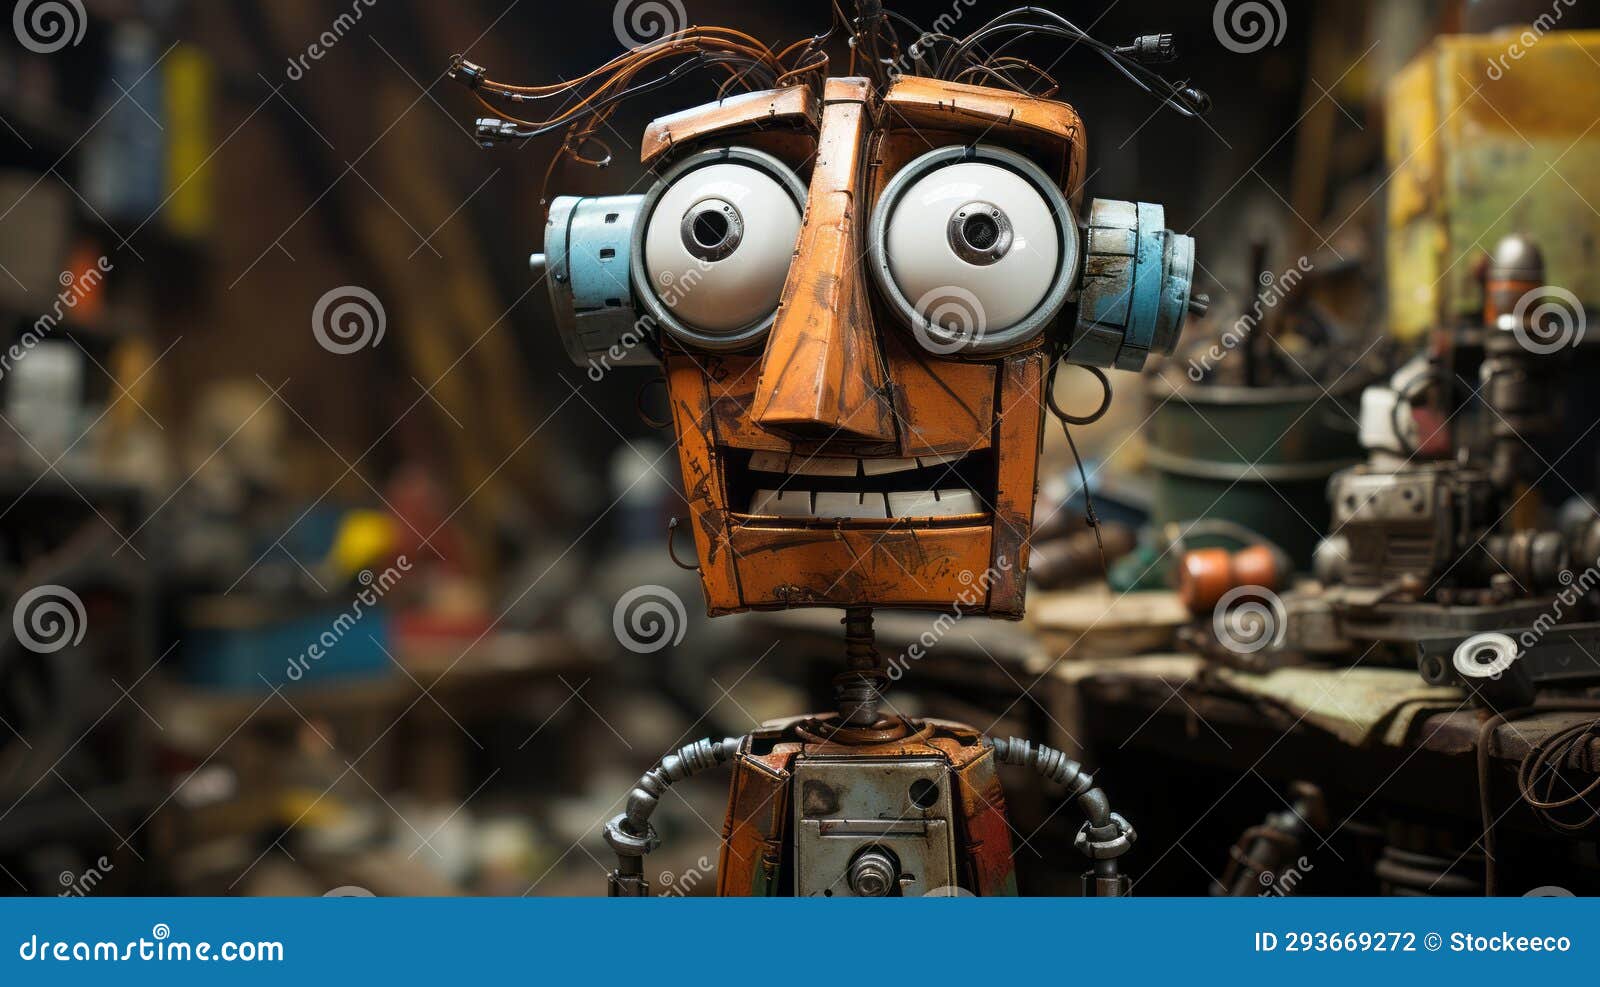 funny robot face sketch: a rusty debris inspired animated film pioneer